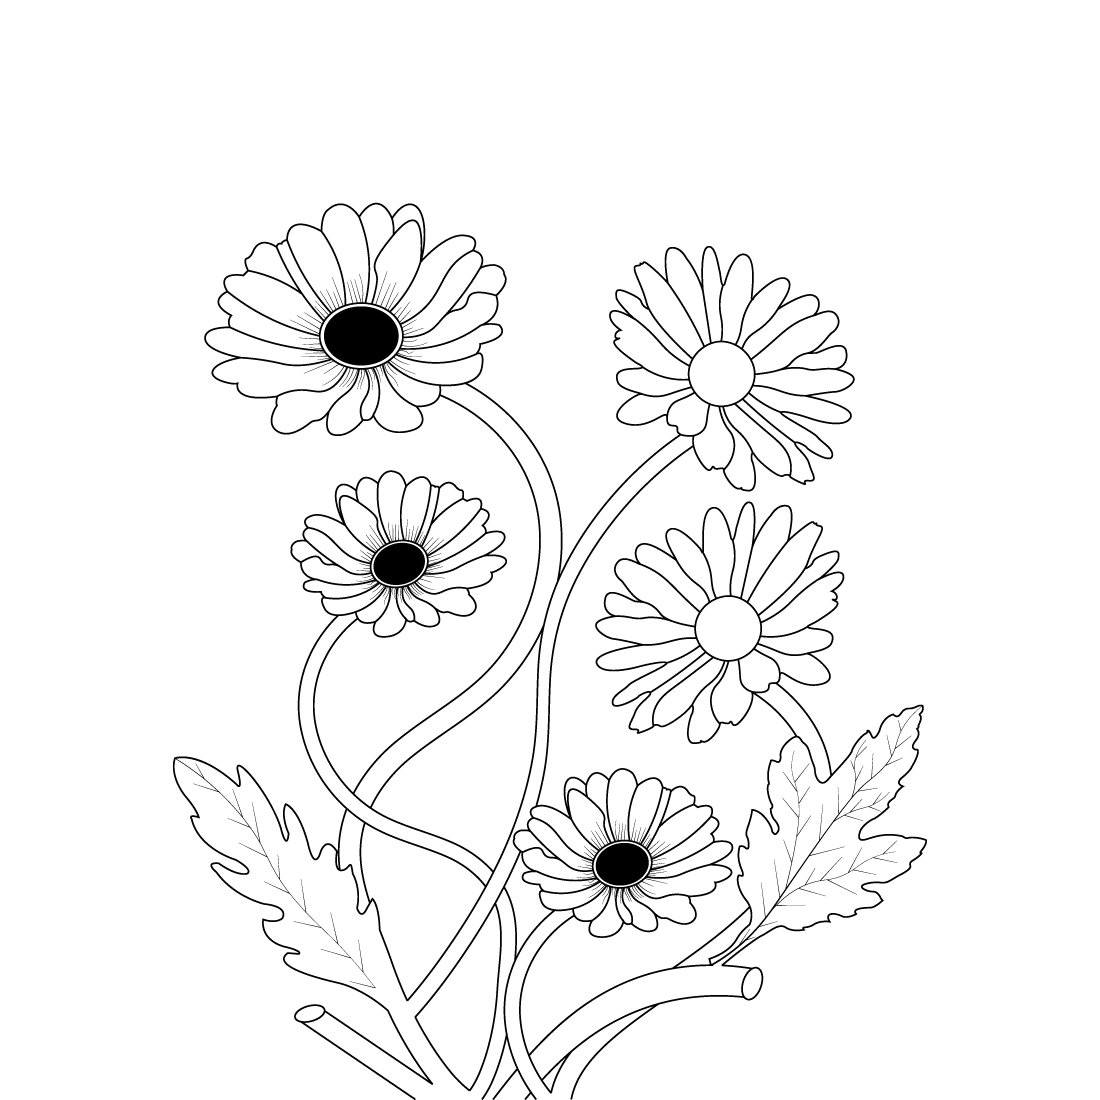 Daisy Flower Coloring Page For Adults preview image.